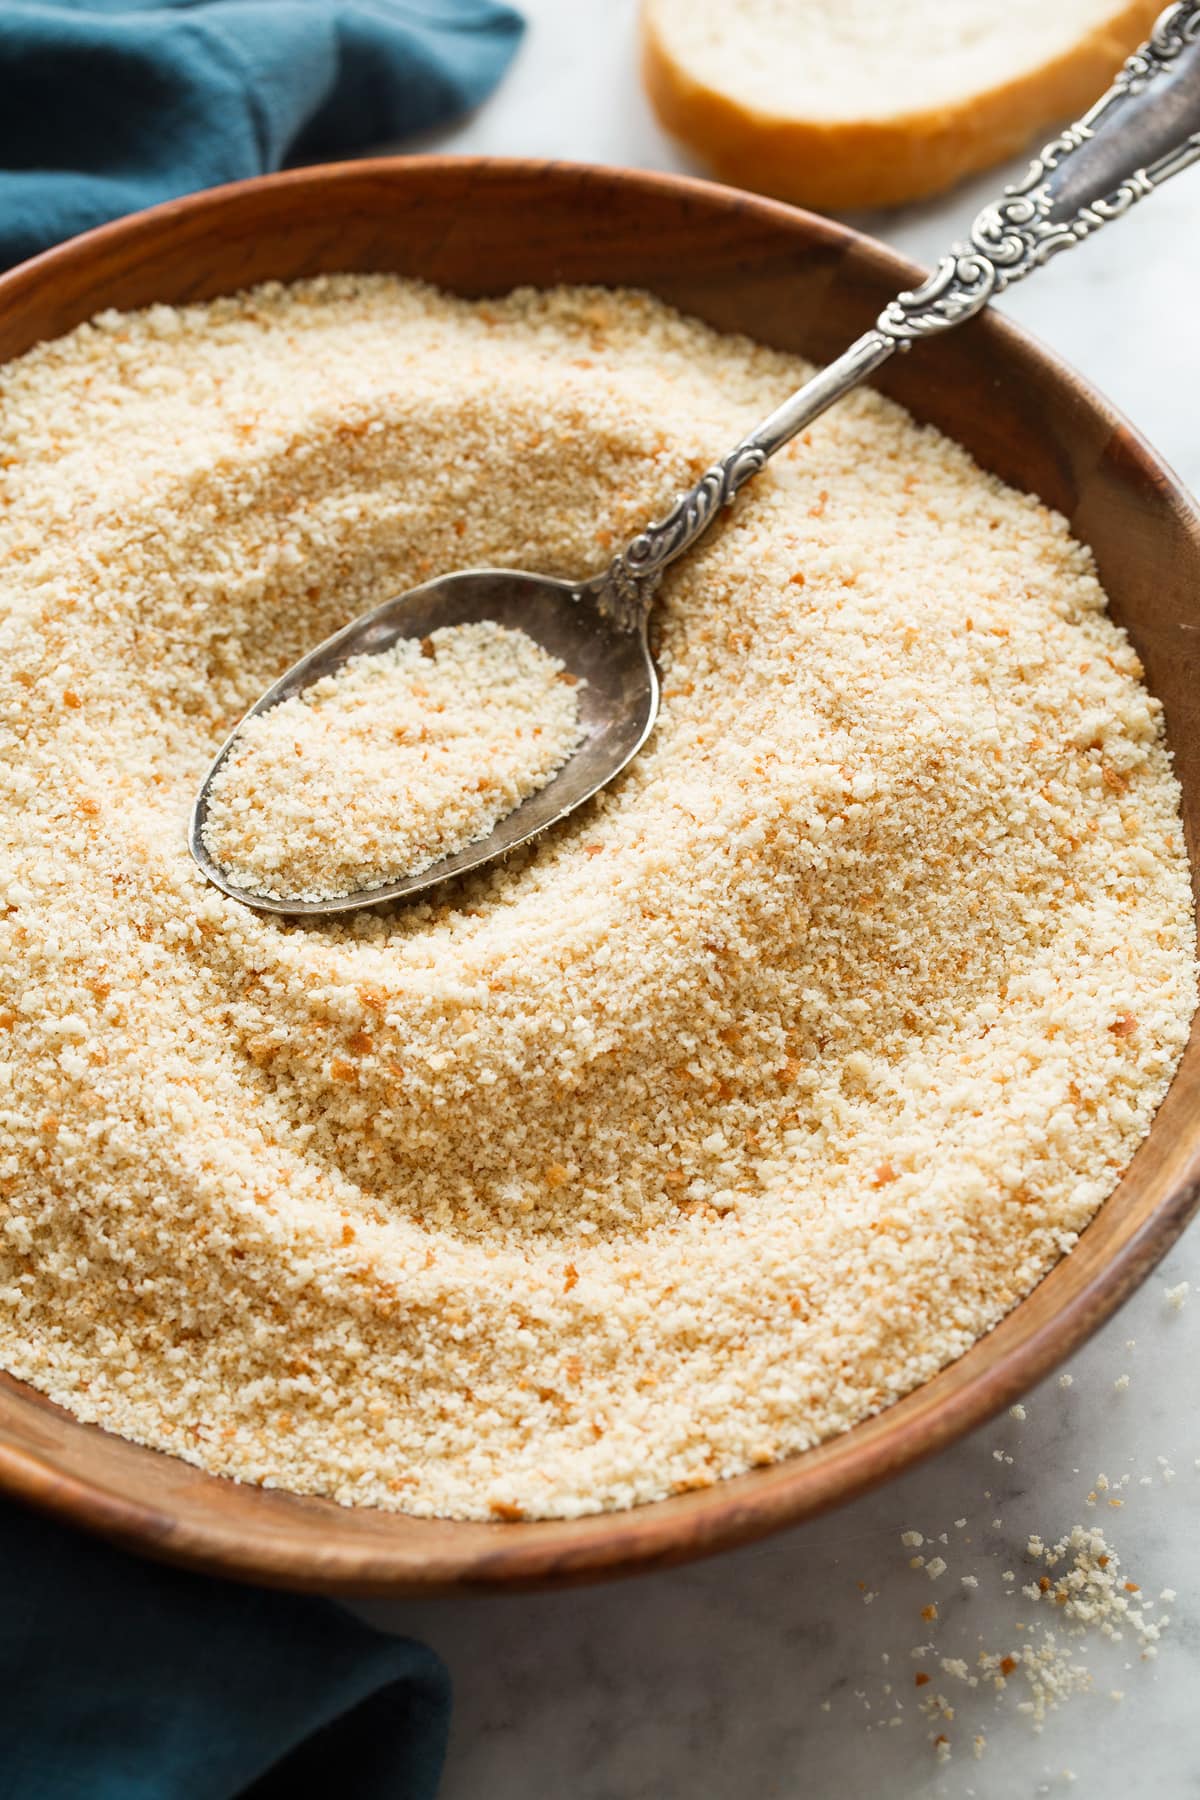 Photo of finished baked bread crumbs in a wooden bowl with a large serving spoon.